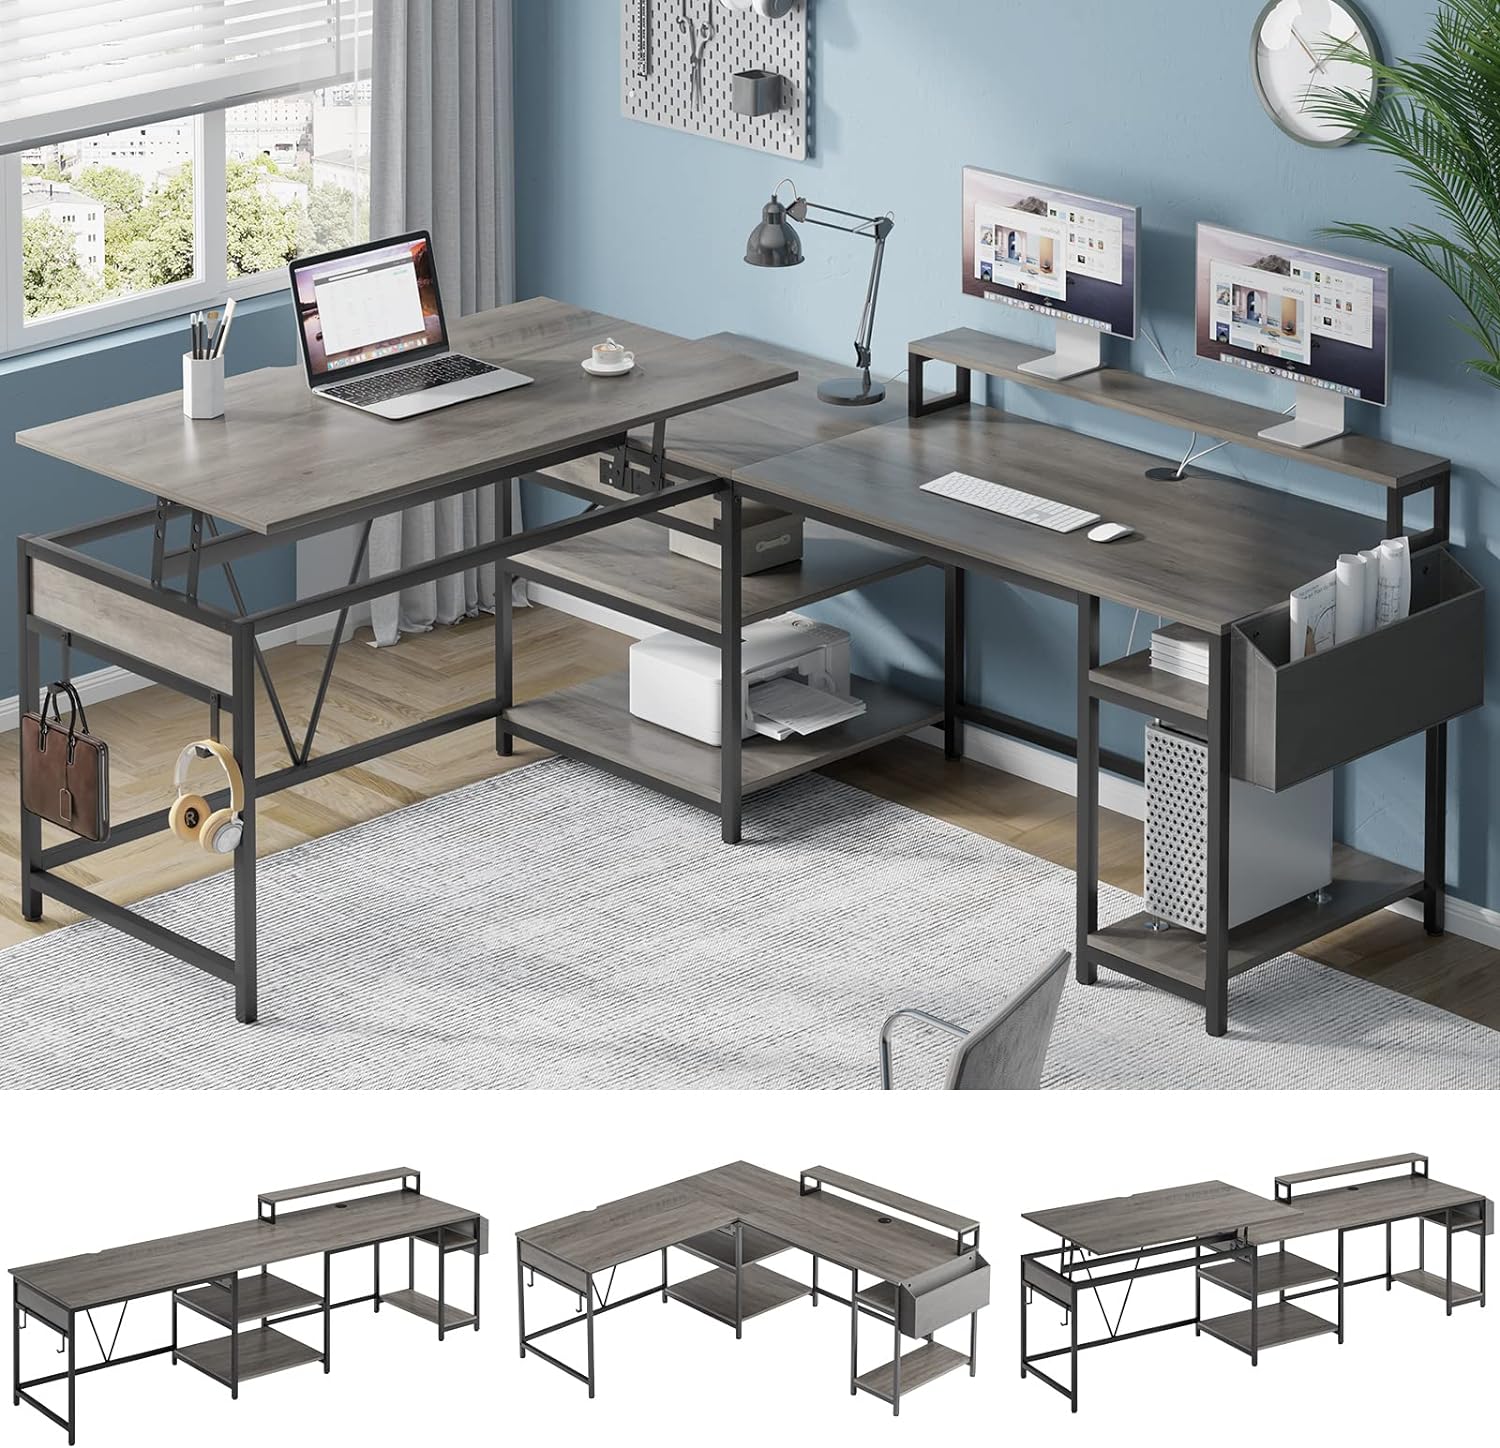 I work form home and have been looking for a desk where I have enough storage, looks good and also the best part that one side of the desk can be converted to a stand up desk. I am able to put my gym equipment at the bottom and work out. The quality of the desk is amazing and would recommend this to my peers. The instructions were easy to follow, however, the only issue I had on the instructions booklet it mainly shows how to set up a straight desk but I need it in the L shape and that part was 